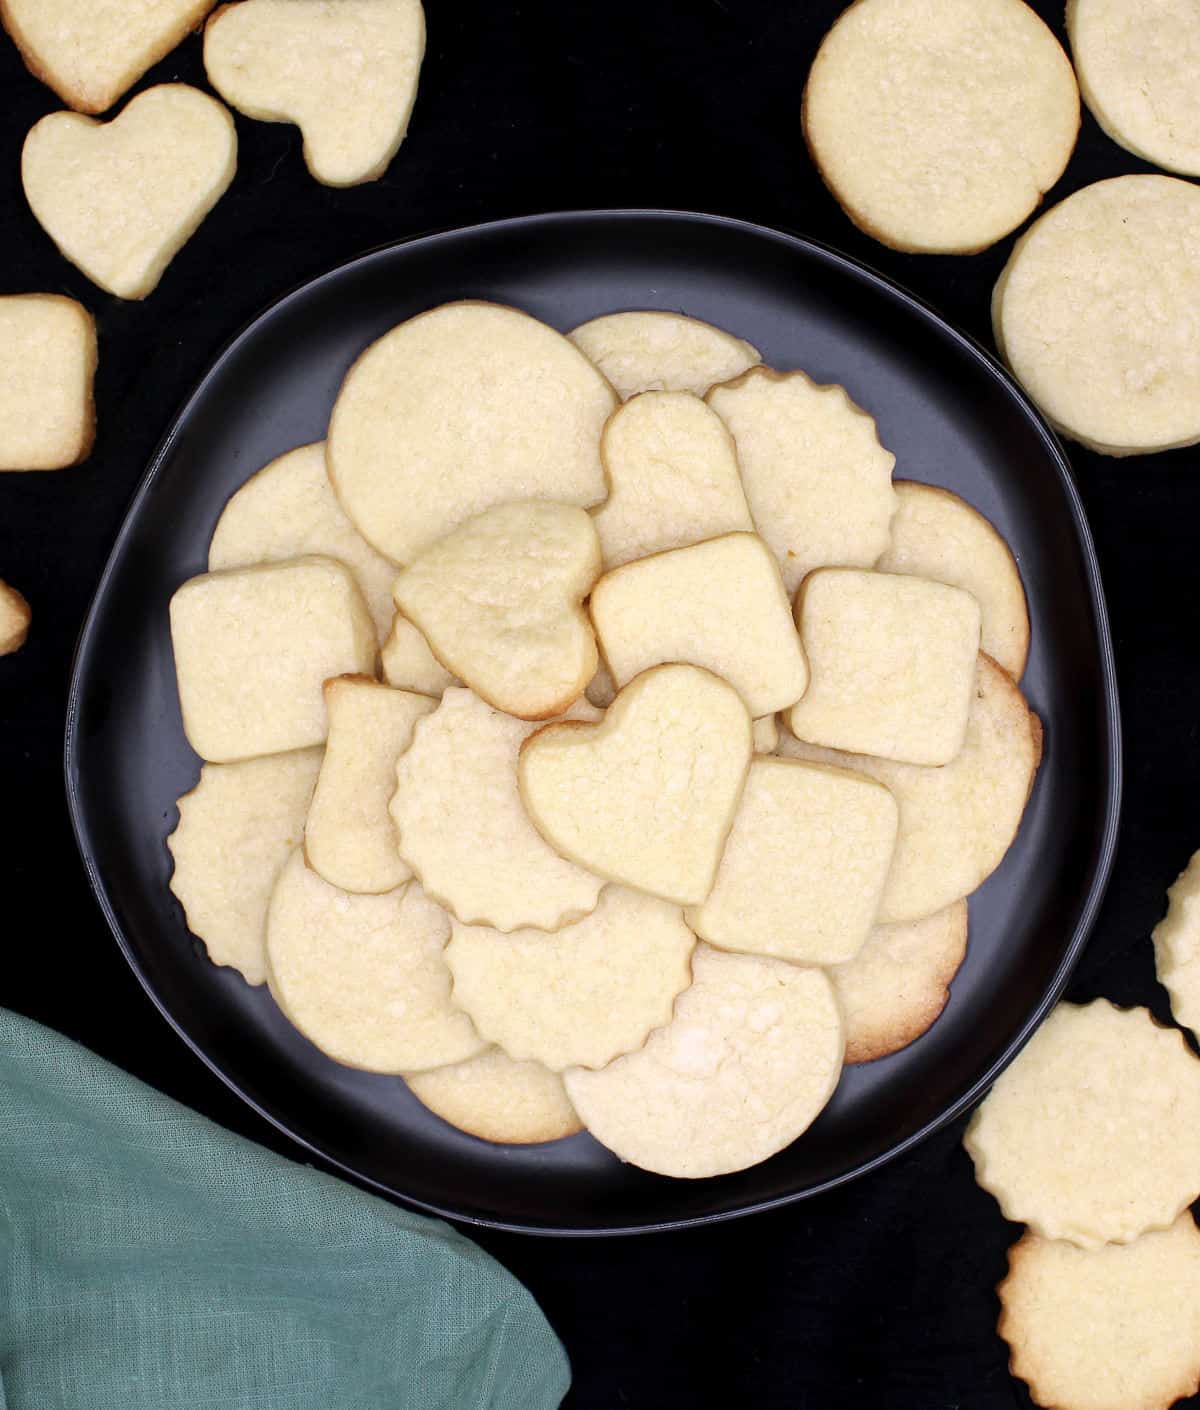 Vegan sugar cookies inside and around a black plate, cut out in discs, hearts and squares.